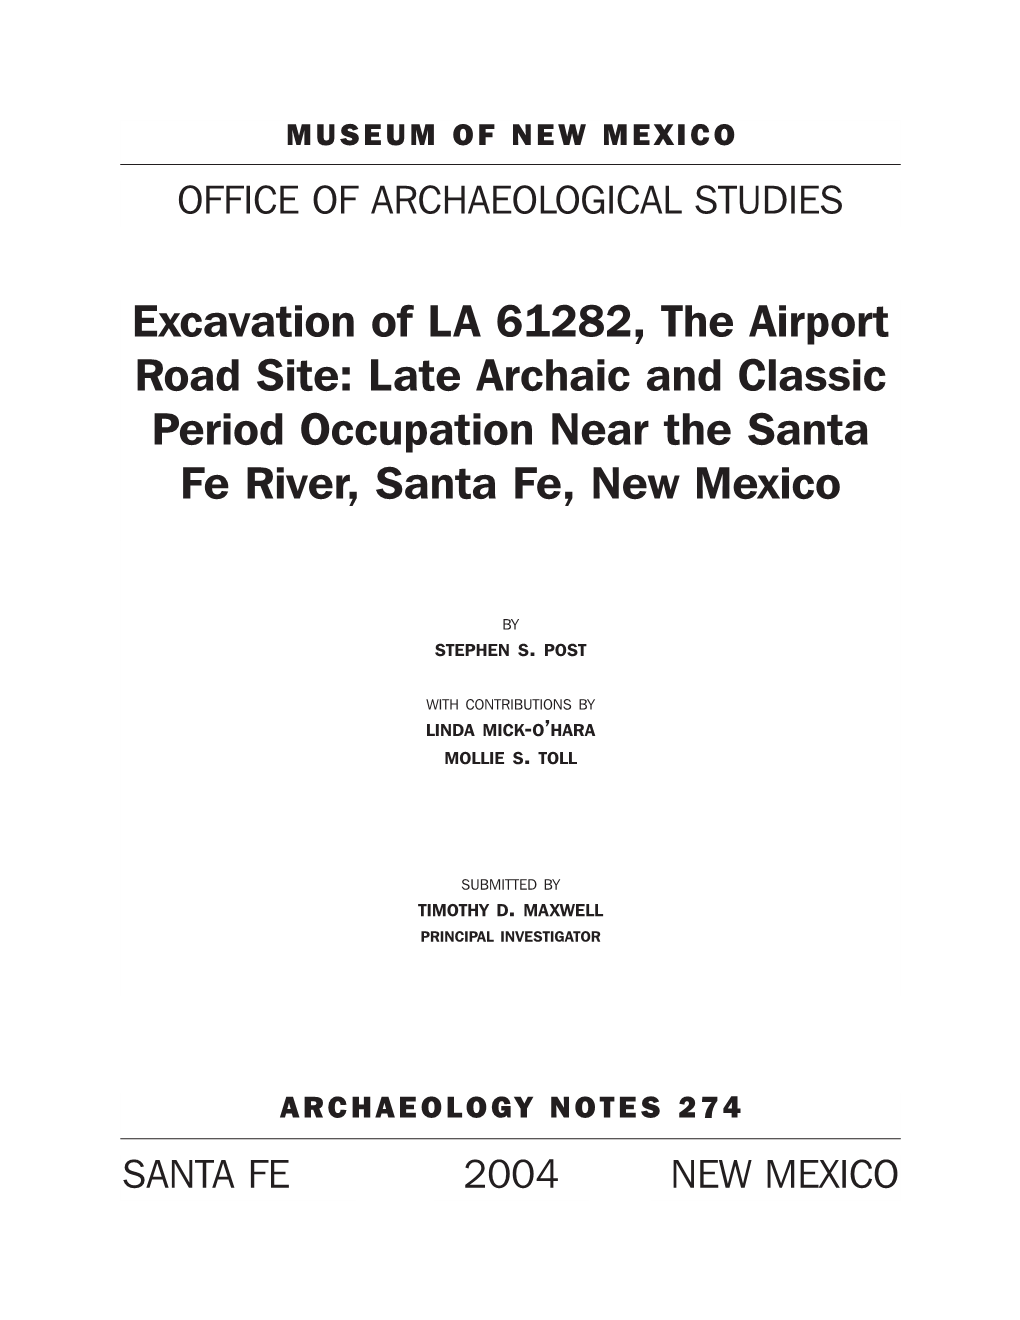 Excavation of LA 61282, the Airport Road Site: Late Archaic and Classic Period Occupation Near the Santa Fe River, Santa Fe, New Mexico